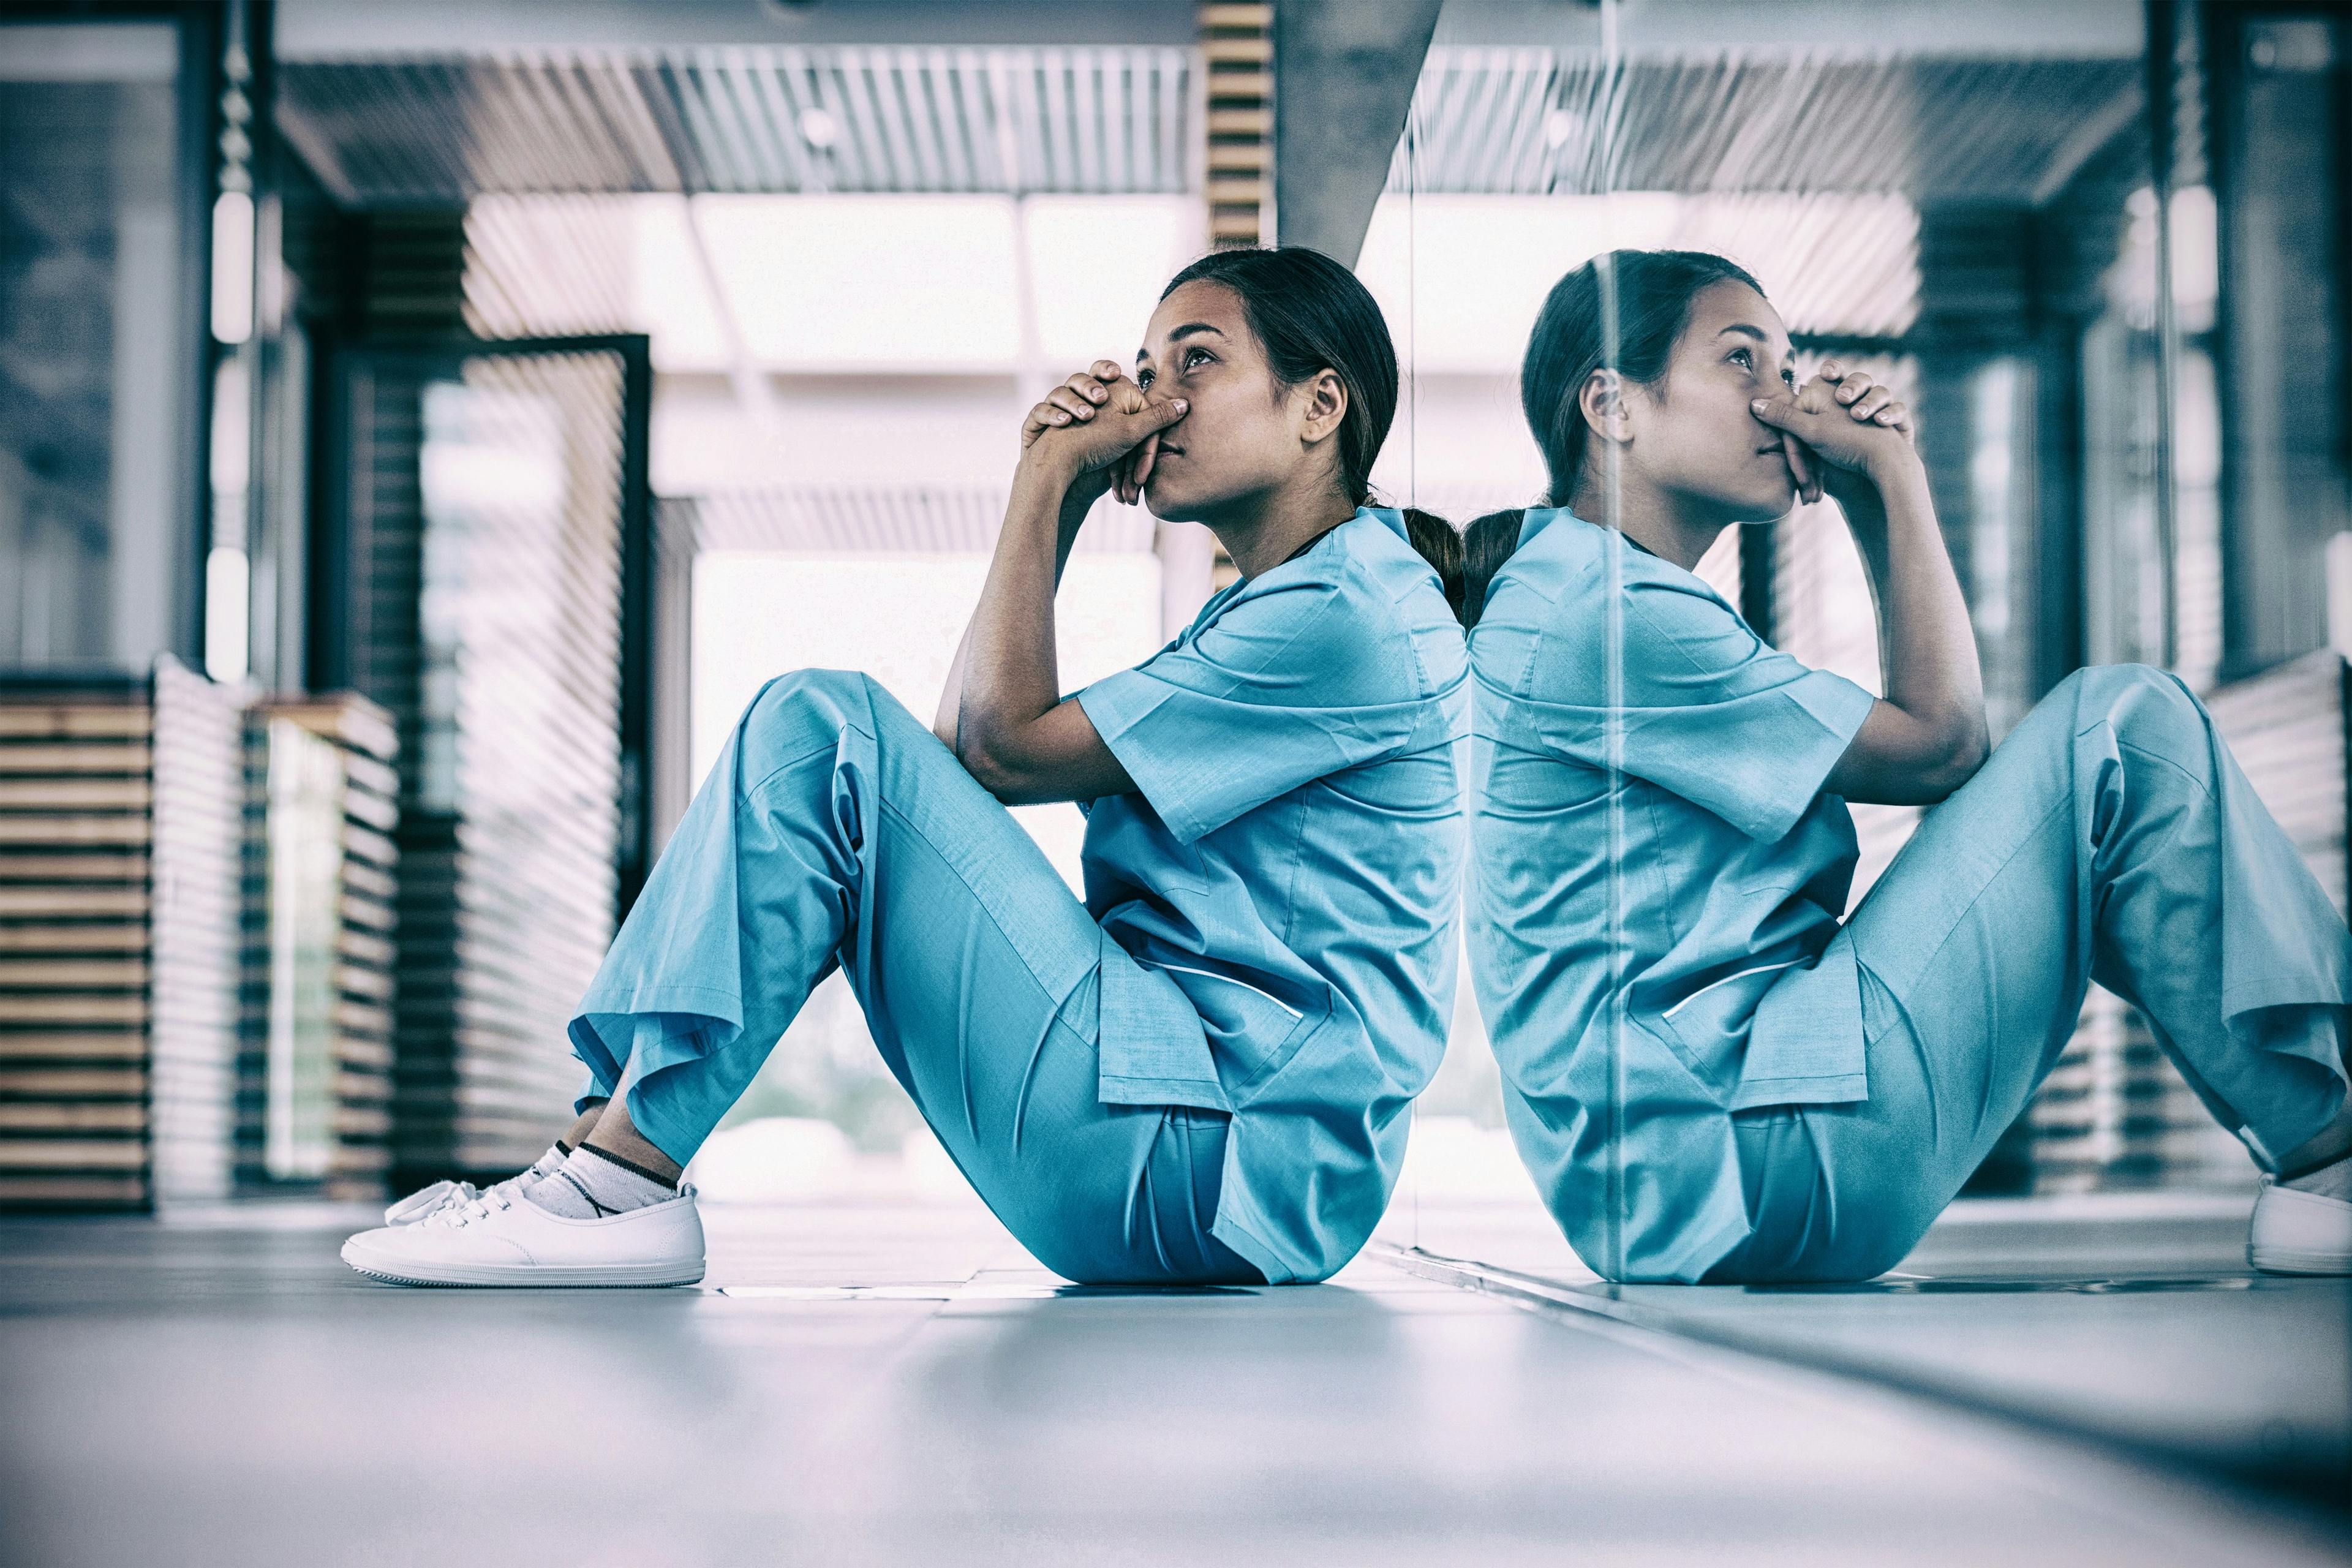 About half of hospital nurses say workplace violence is rising